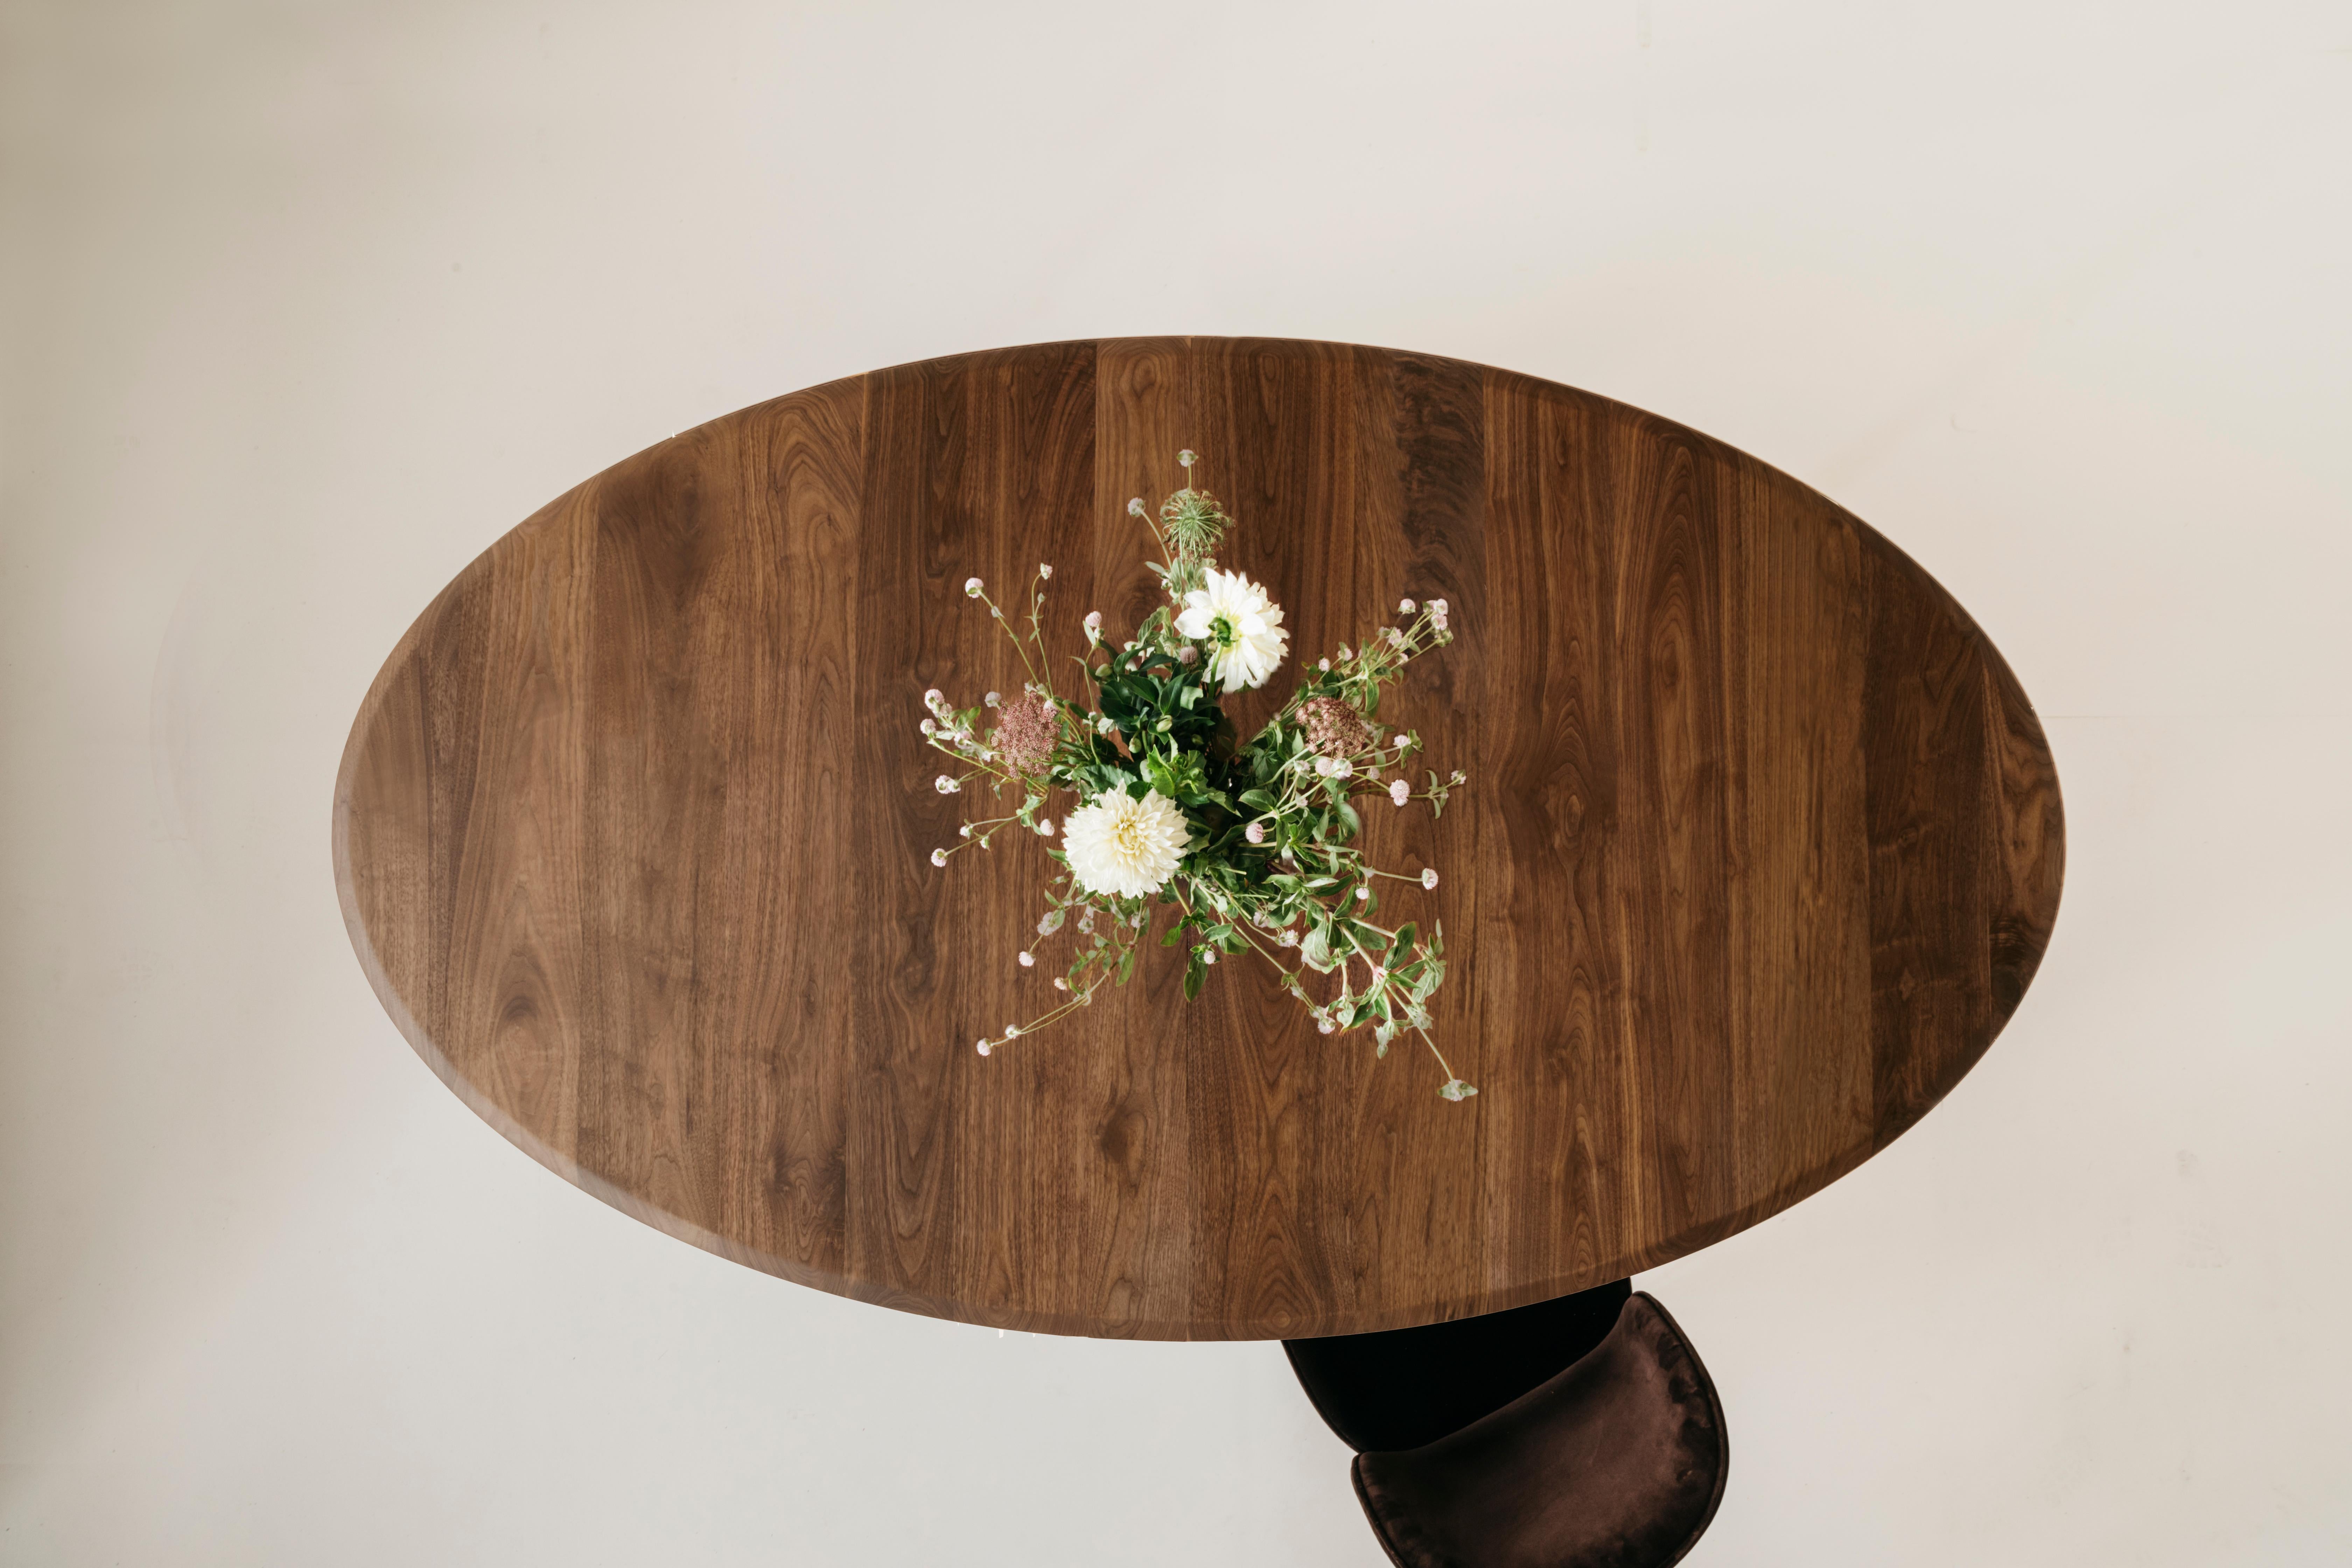 The Richard Watson oval dining table provides a comfortable, intimate shape to dine with others. This table has an option to extend by use of smooth extension hardware that expands to hold a 20” leaf.

Each Richard Watson piece is made in